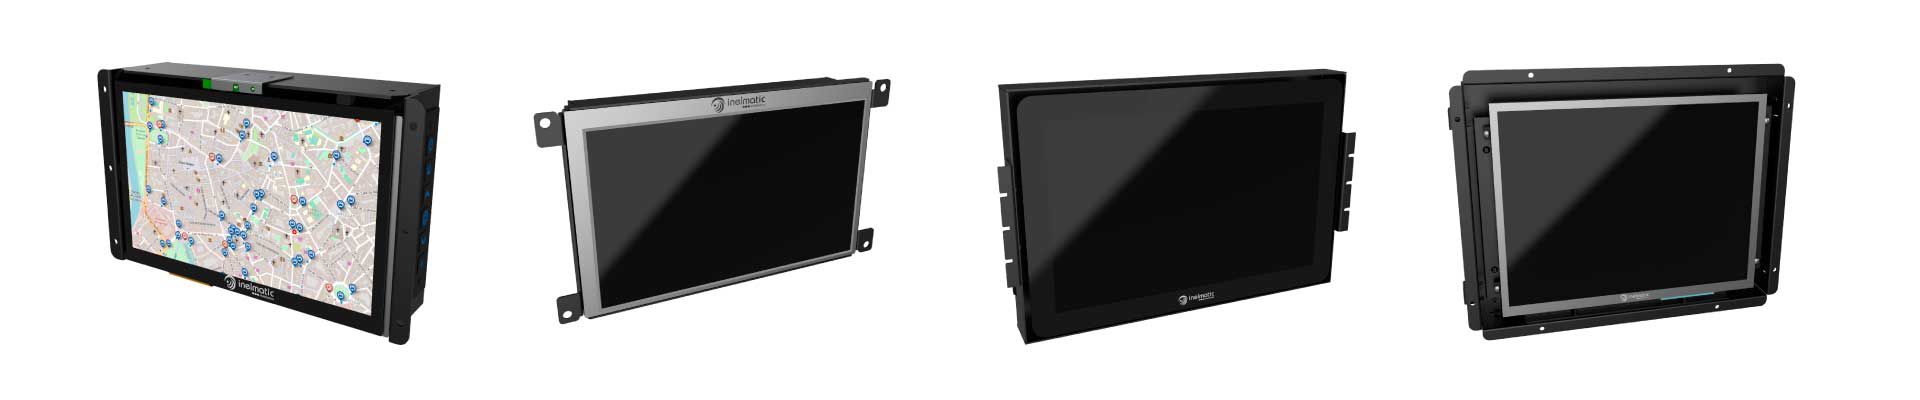 Open frame screen display for medical devices integration - Inelmatic